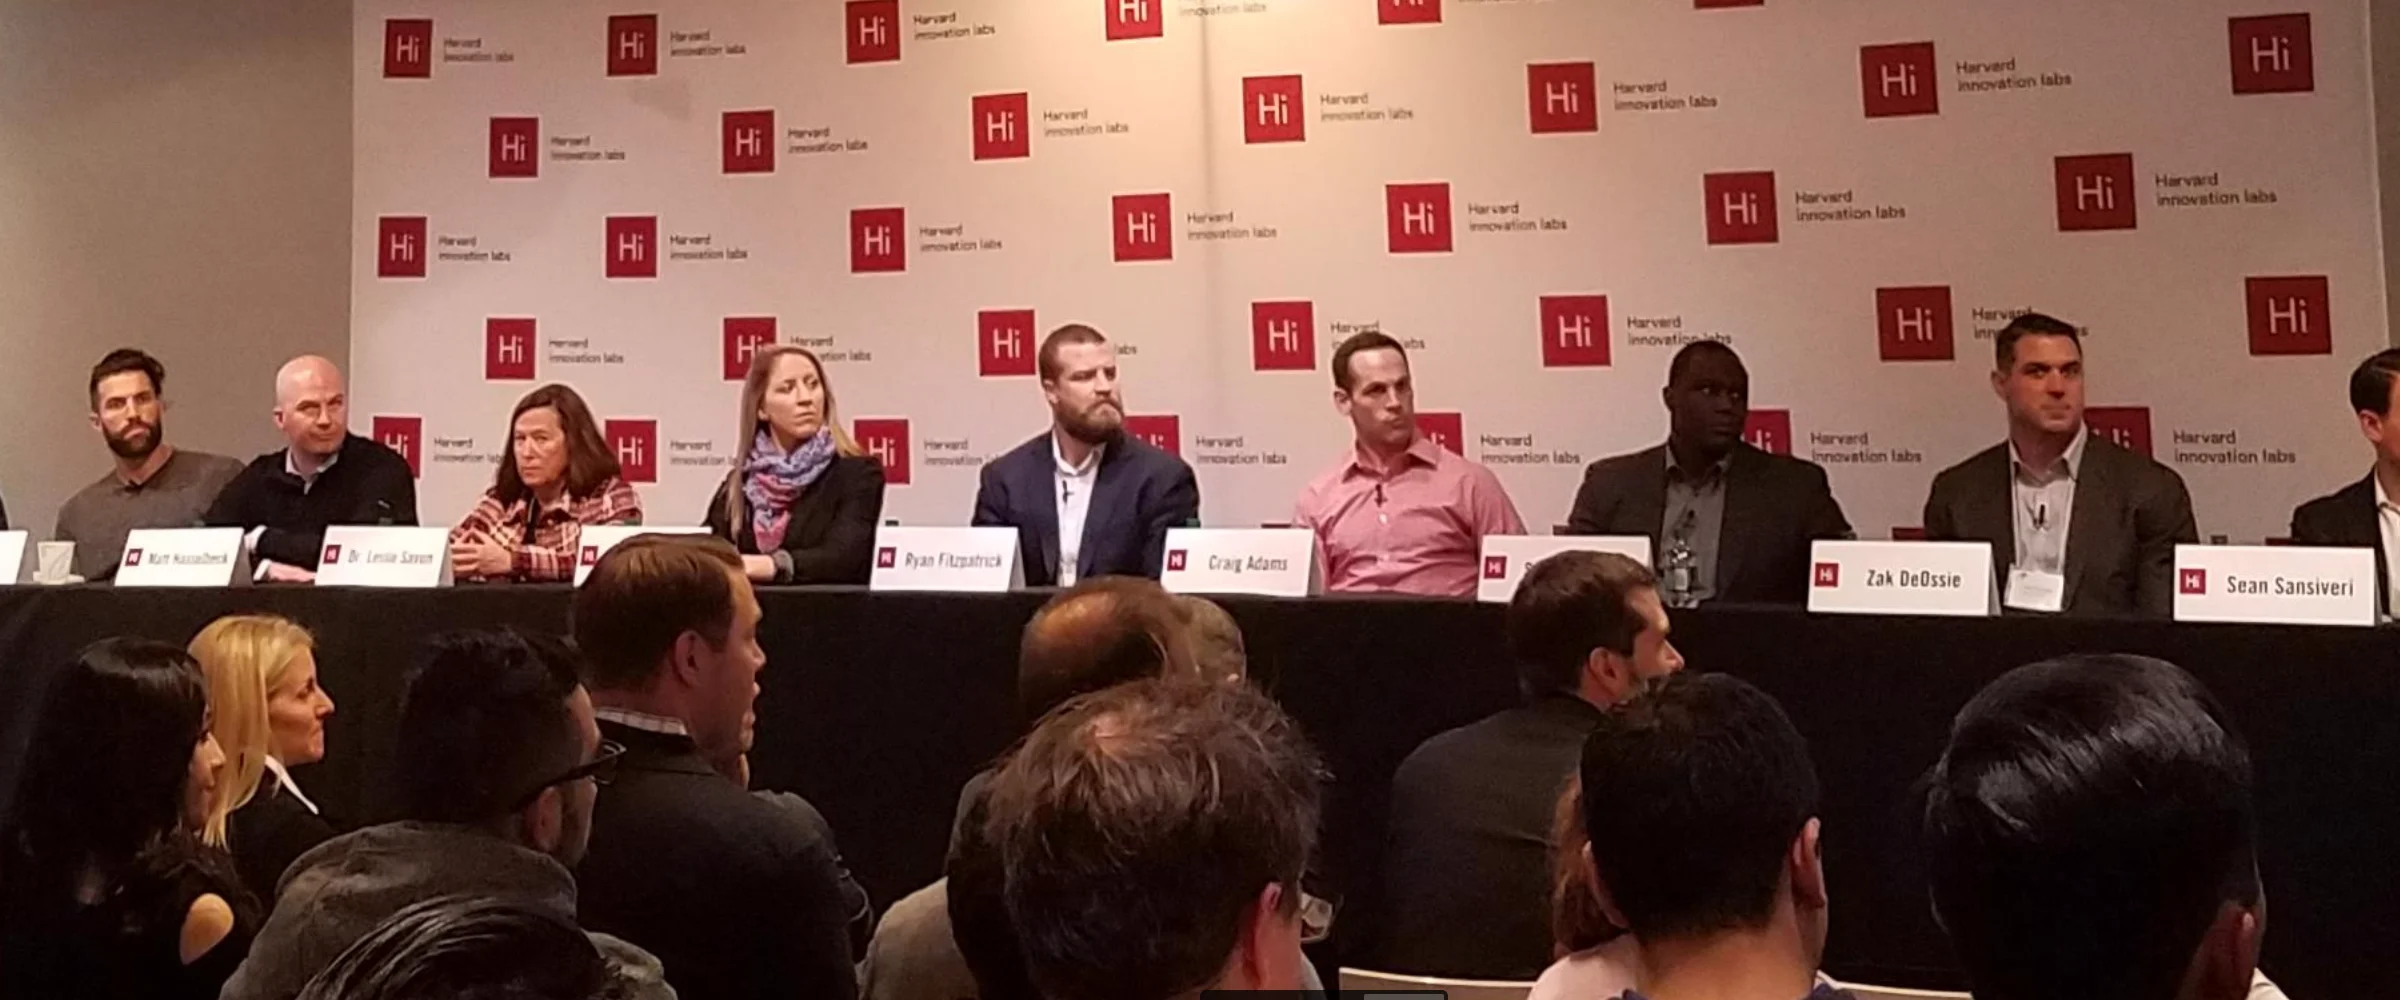 NFL Players, WHOOP Discuss Wearable Technology Data at Harvard Forum